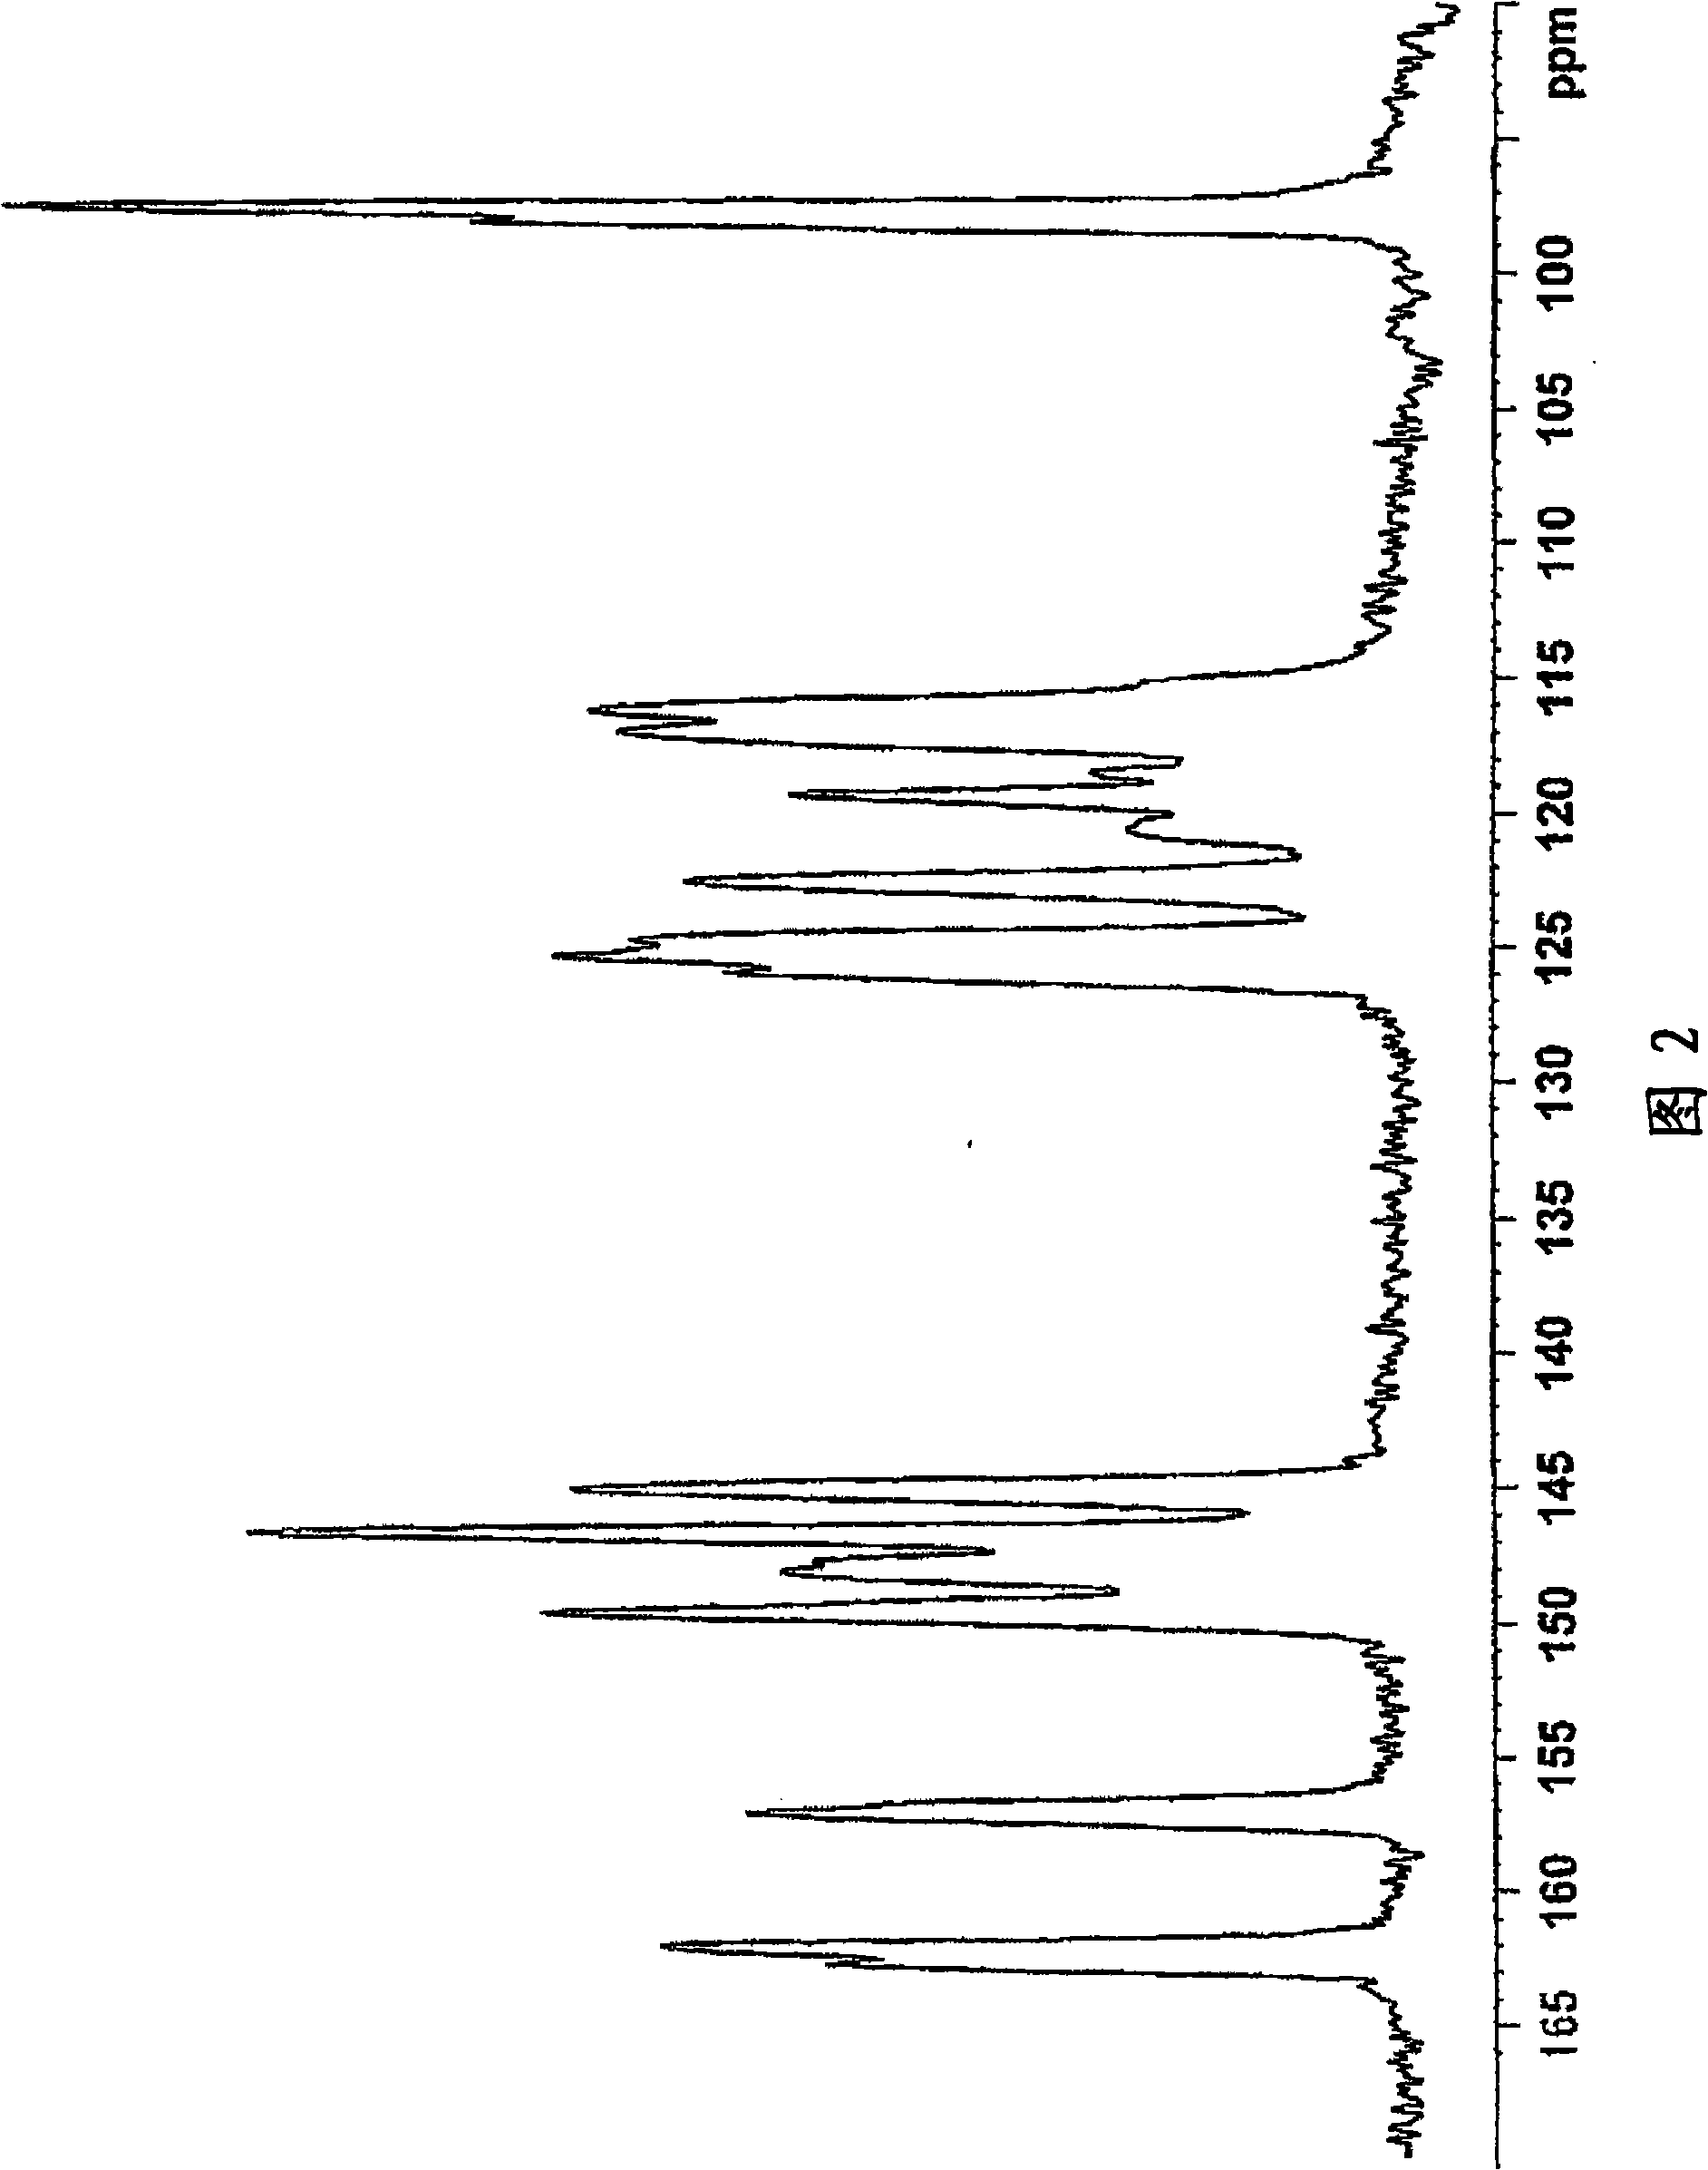 Salt of sulfinylbenzimidazole compound, and crystal and amorphous form thereof